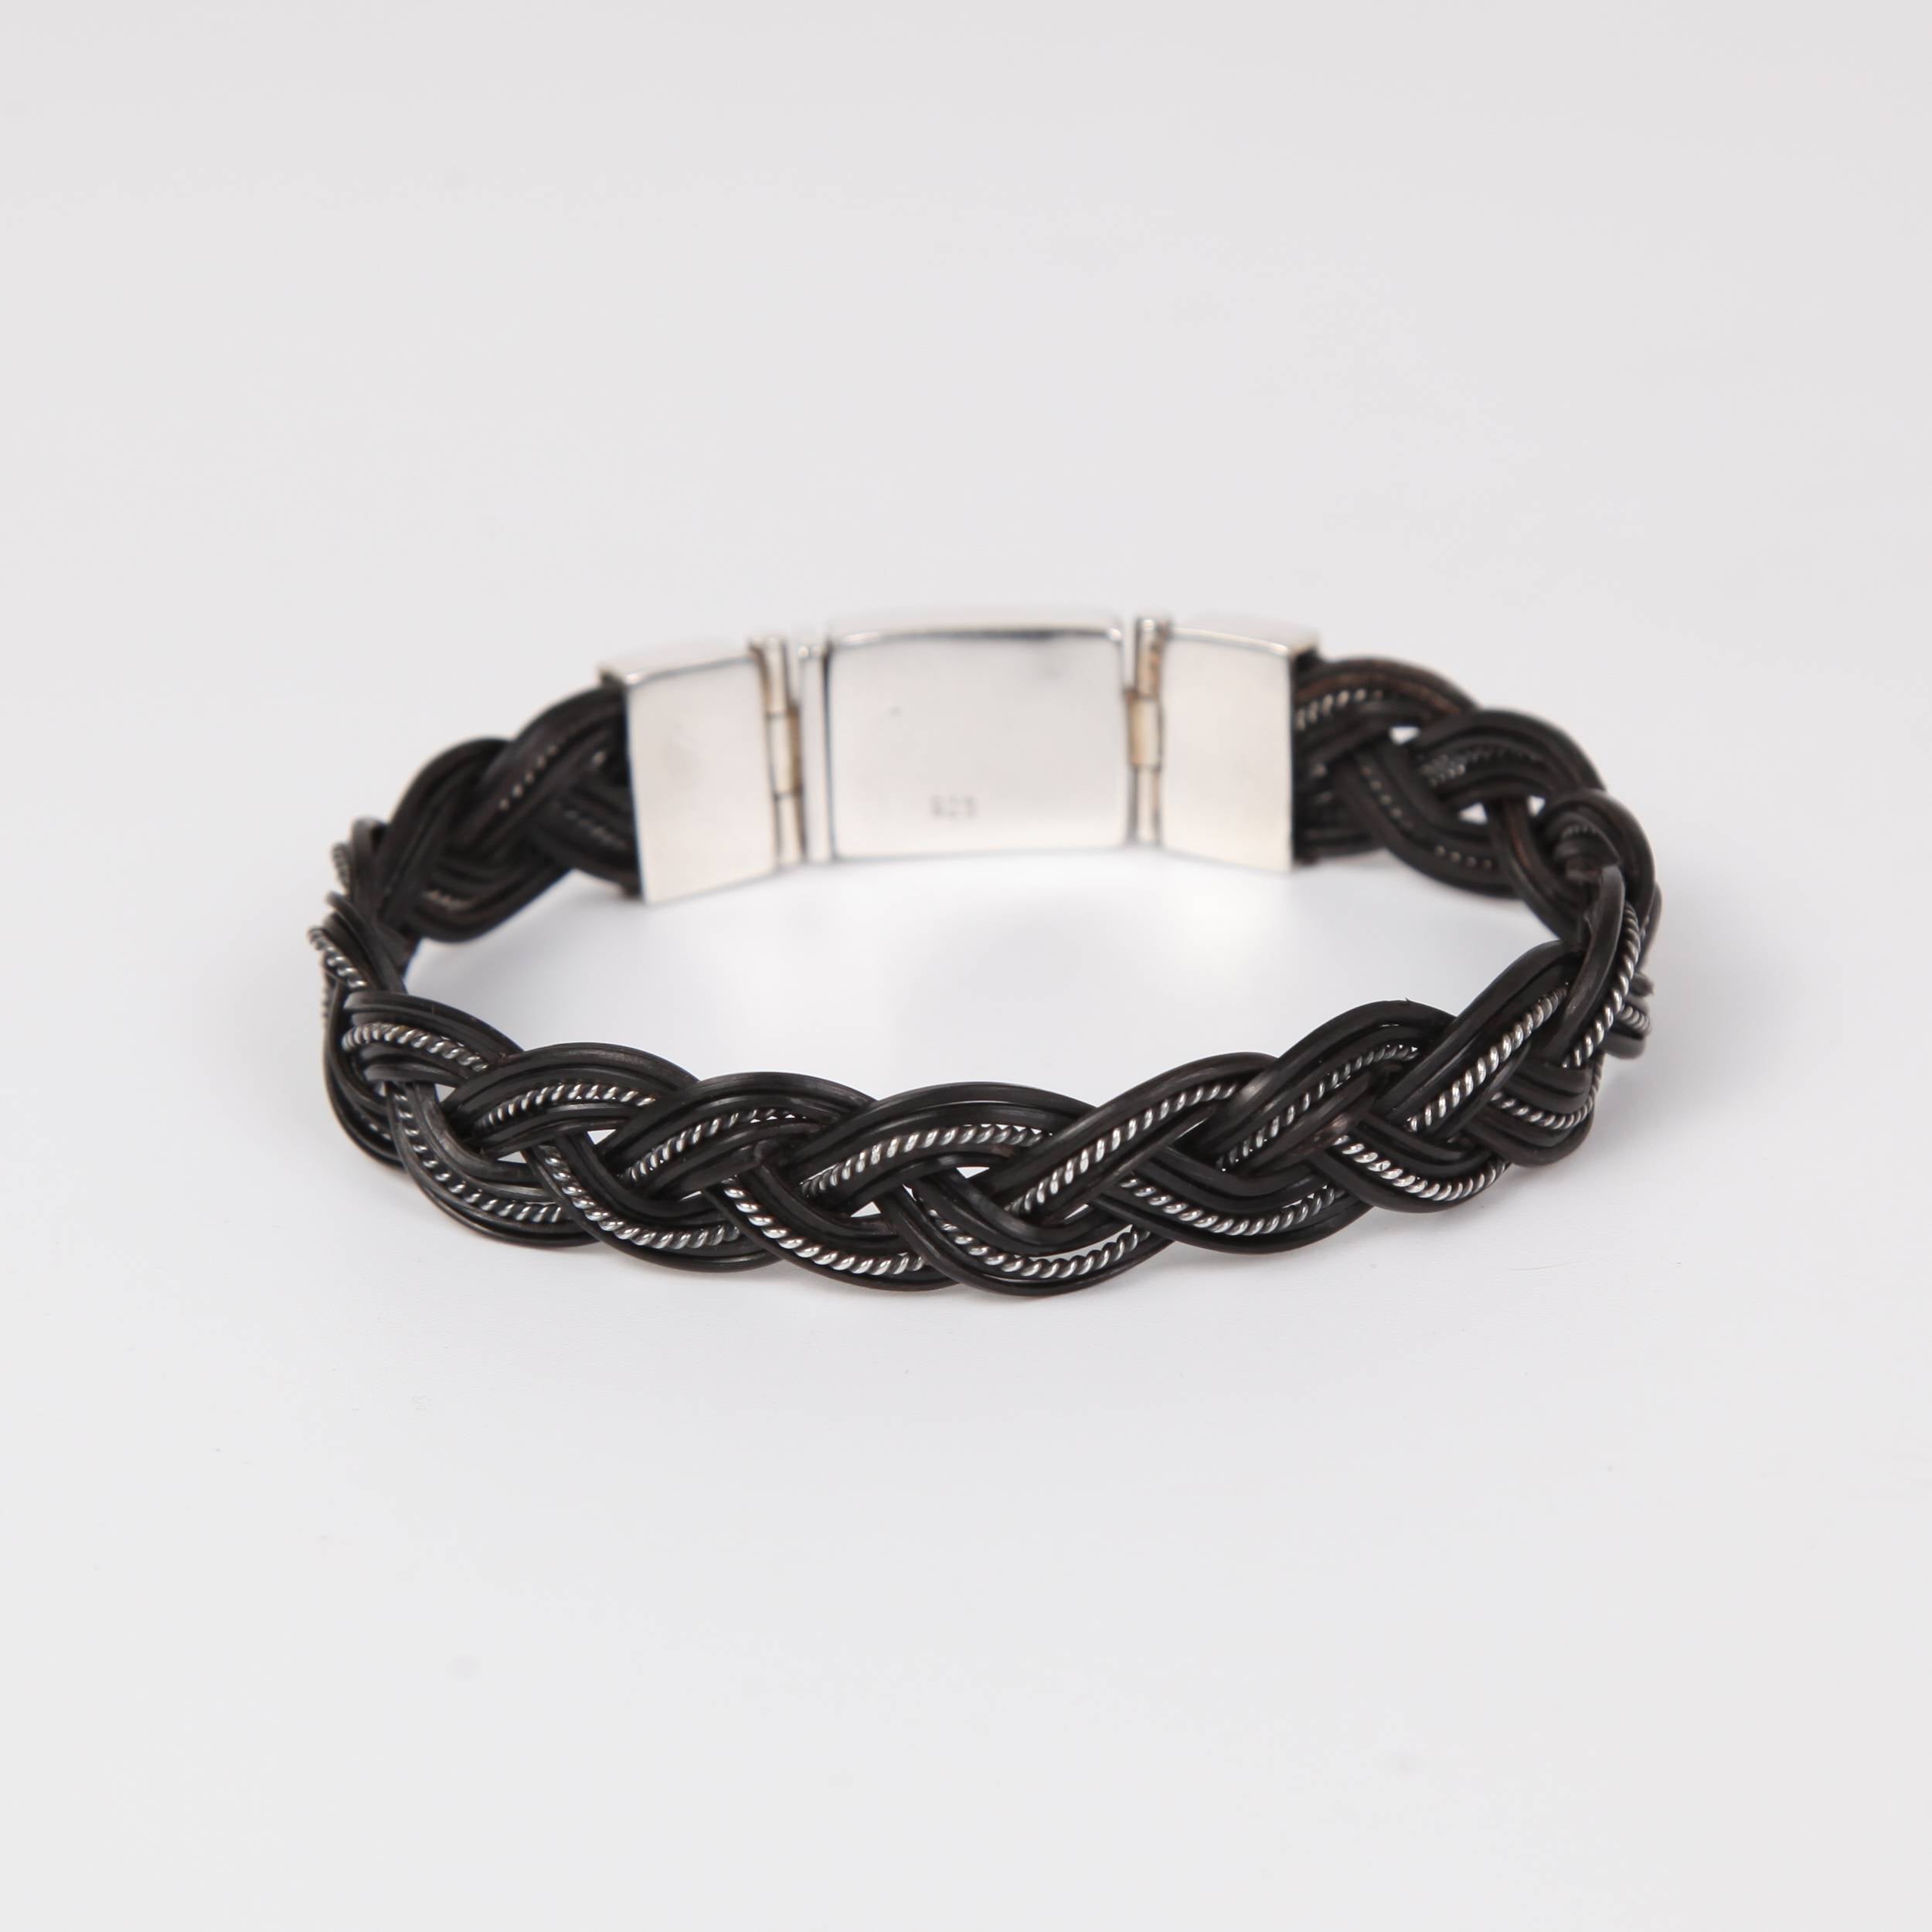 Elephant Hair Bracelet with Sterling Silver Detailed